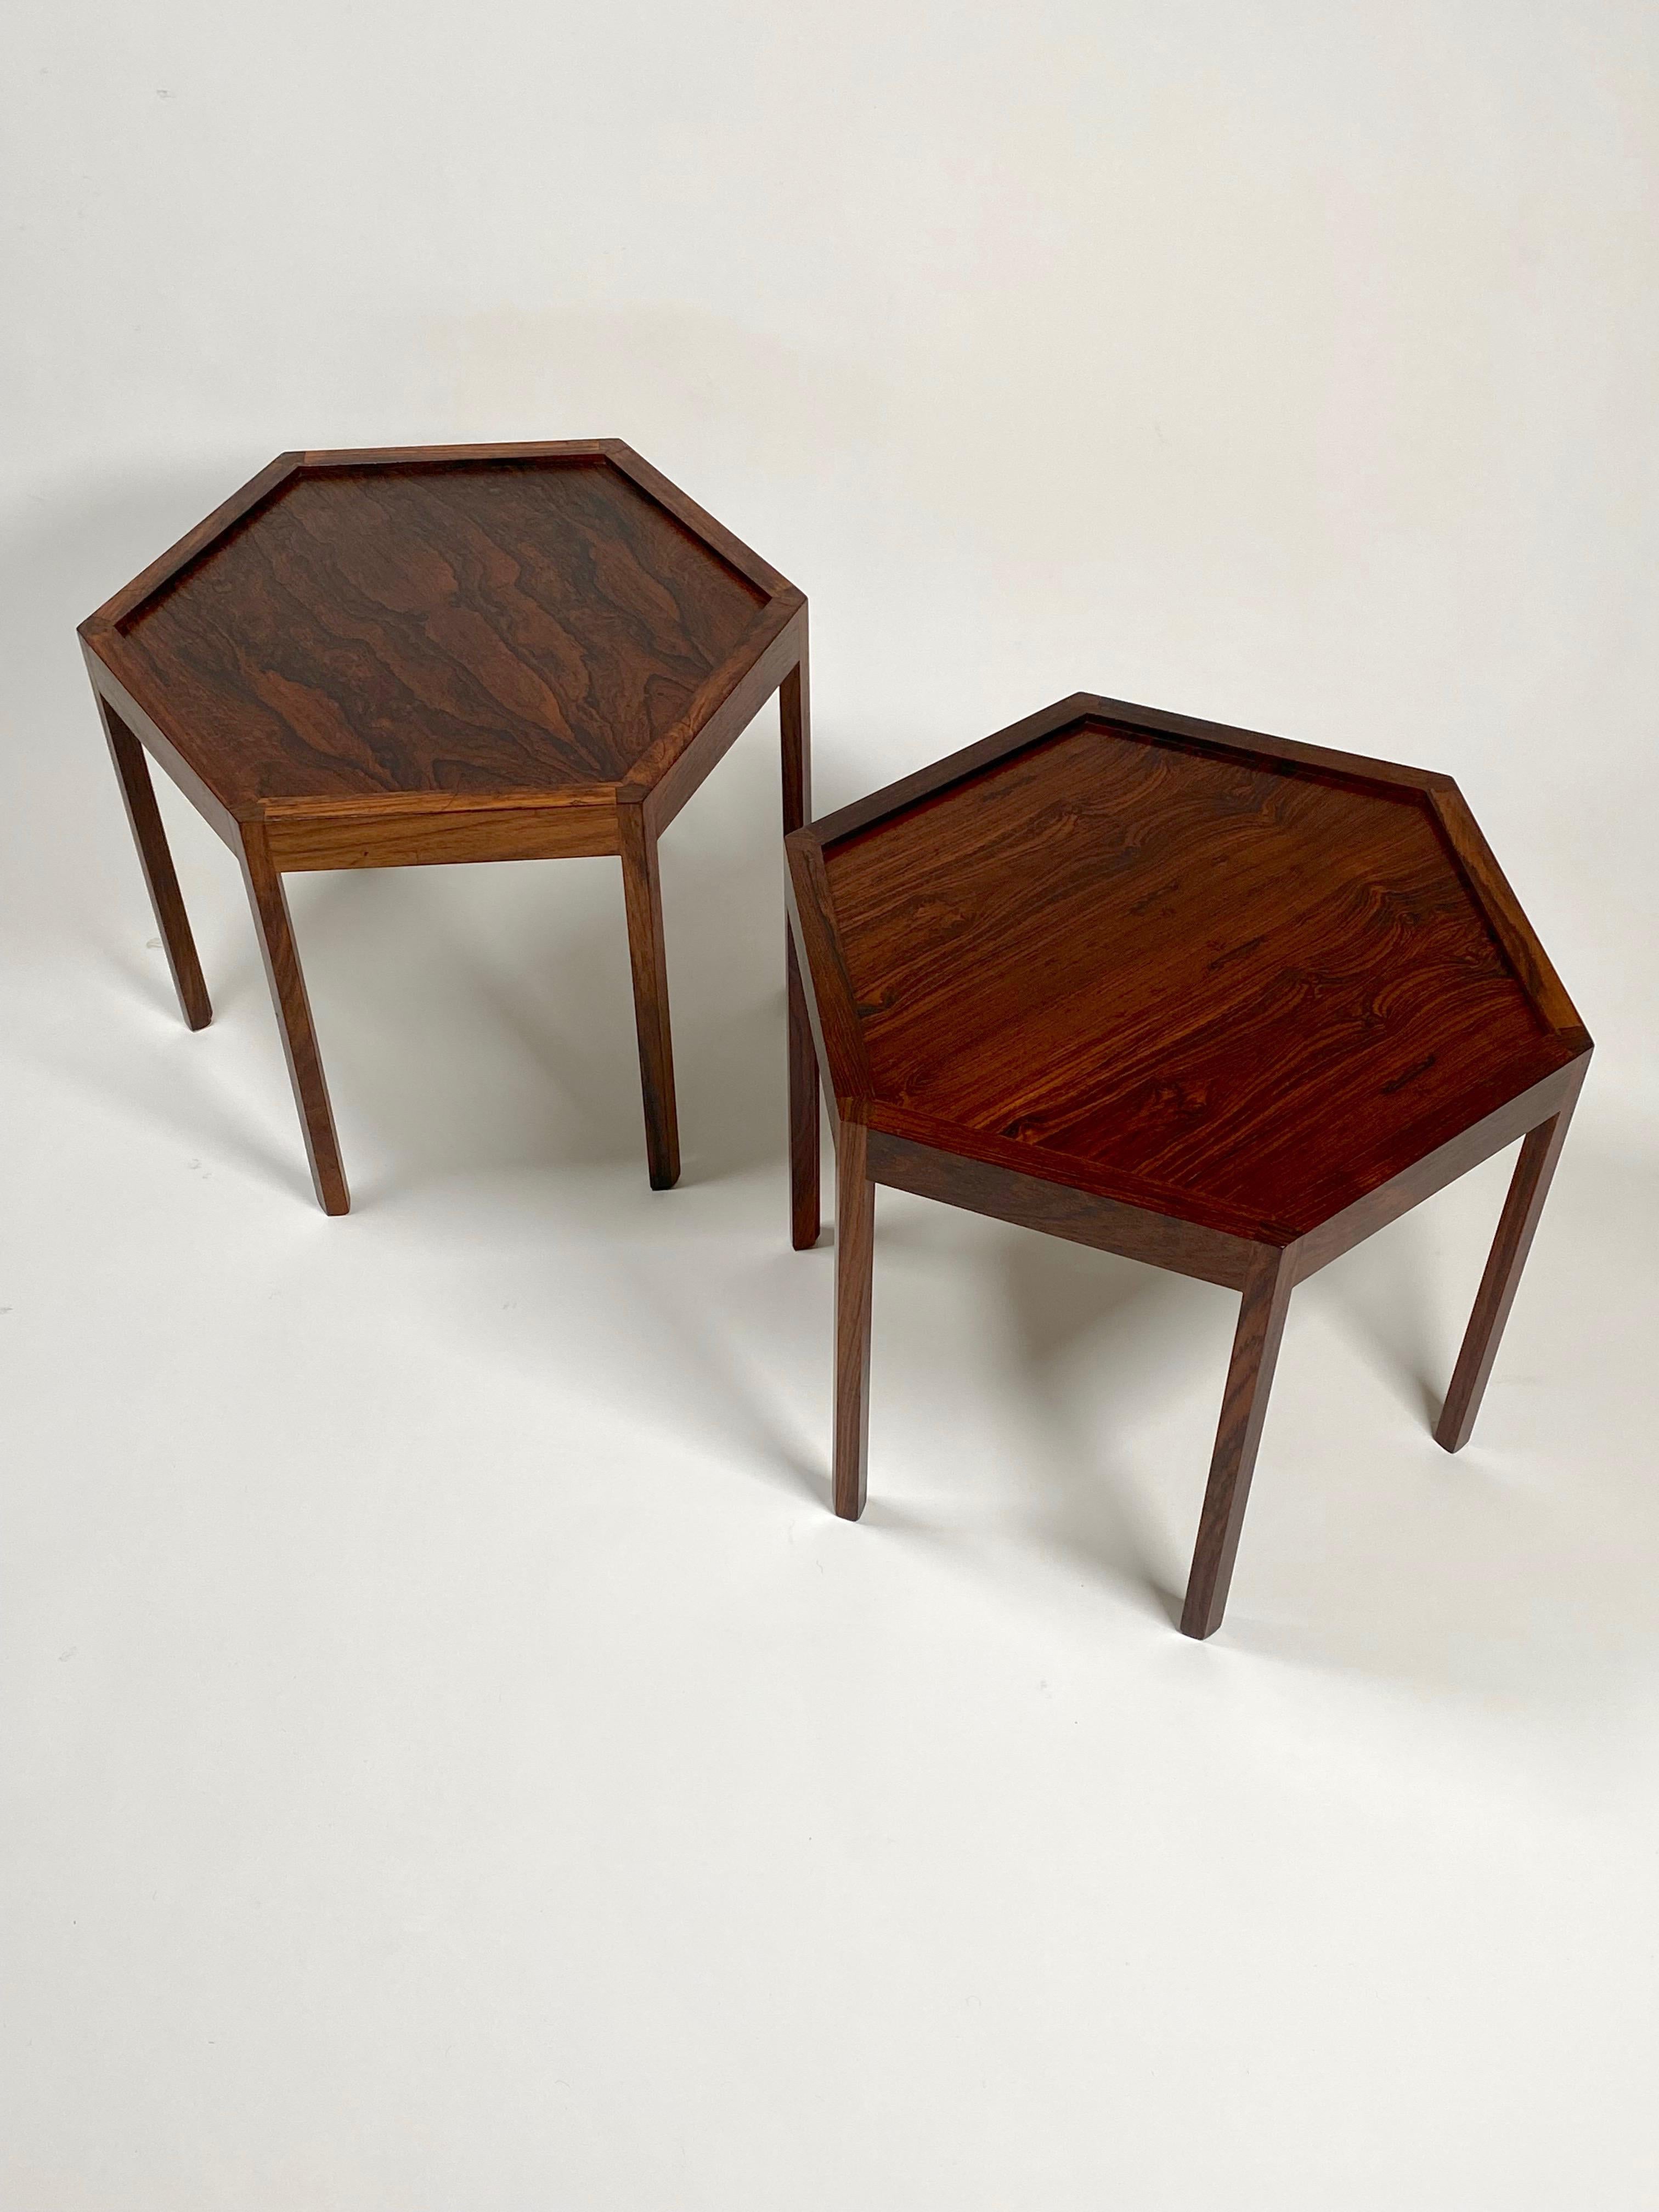 Pair of hexagonal rosewood stackable side tables by Danish designer Hans C Andersen, uncommon to find this design in a all rosewood construction. Created with great attention to detail in the manufacturing of these tables, i.e., the joinery and the